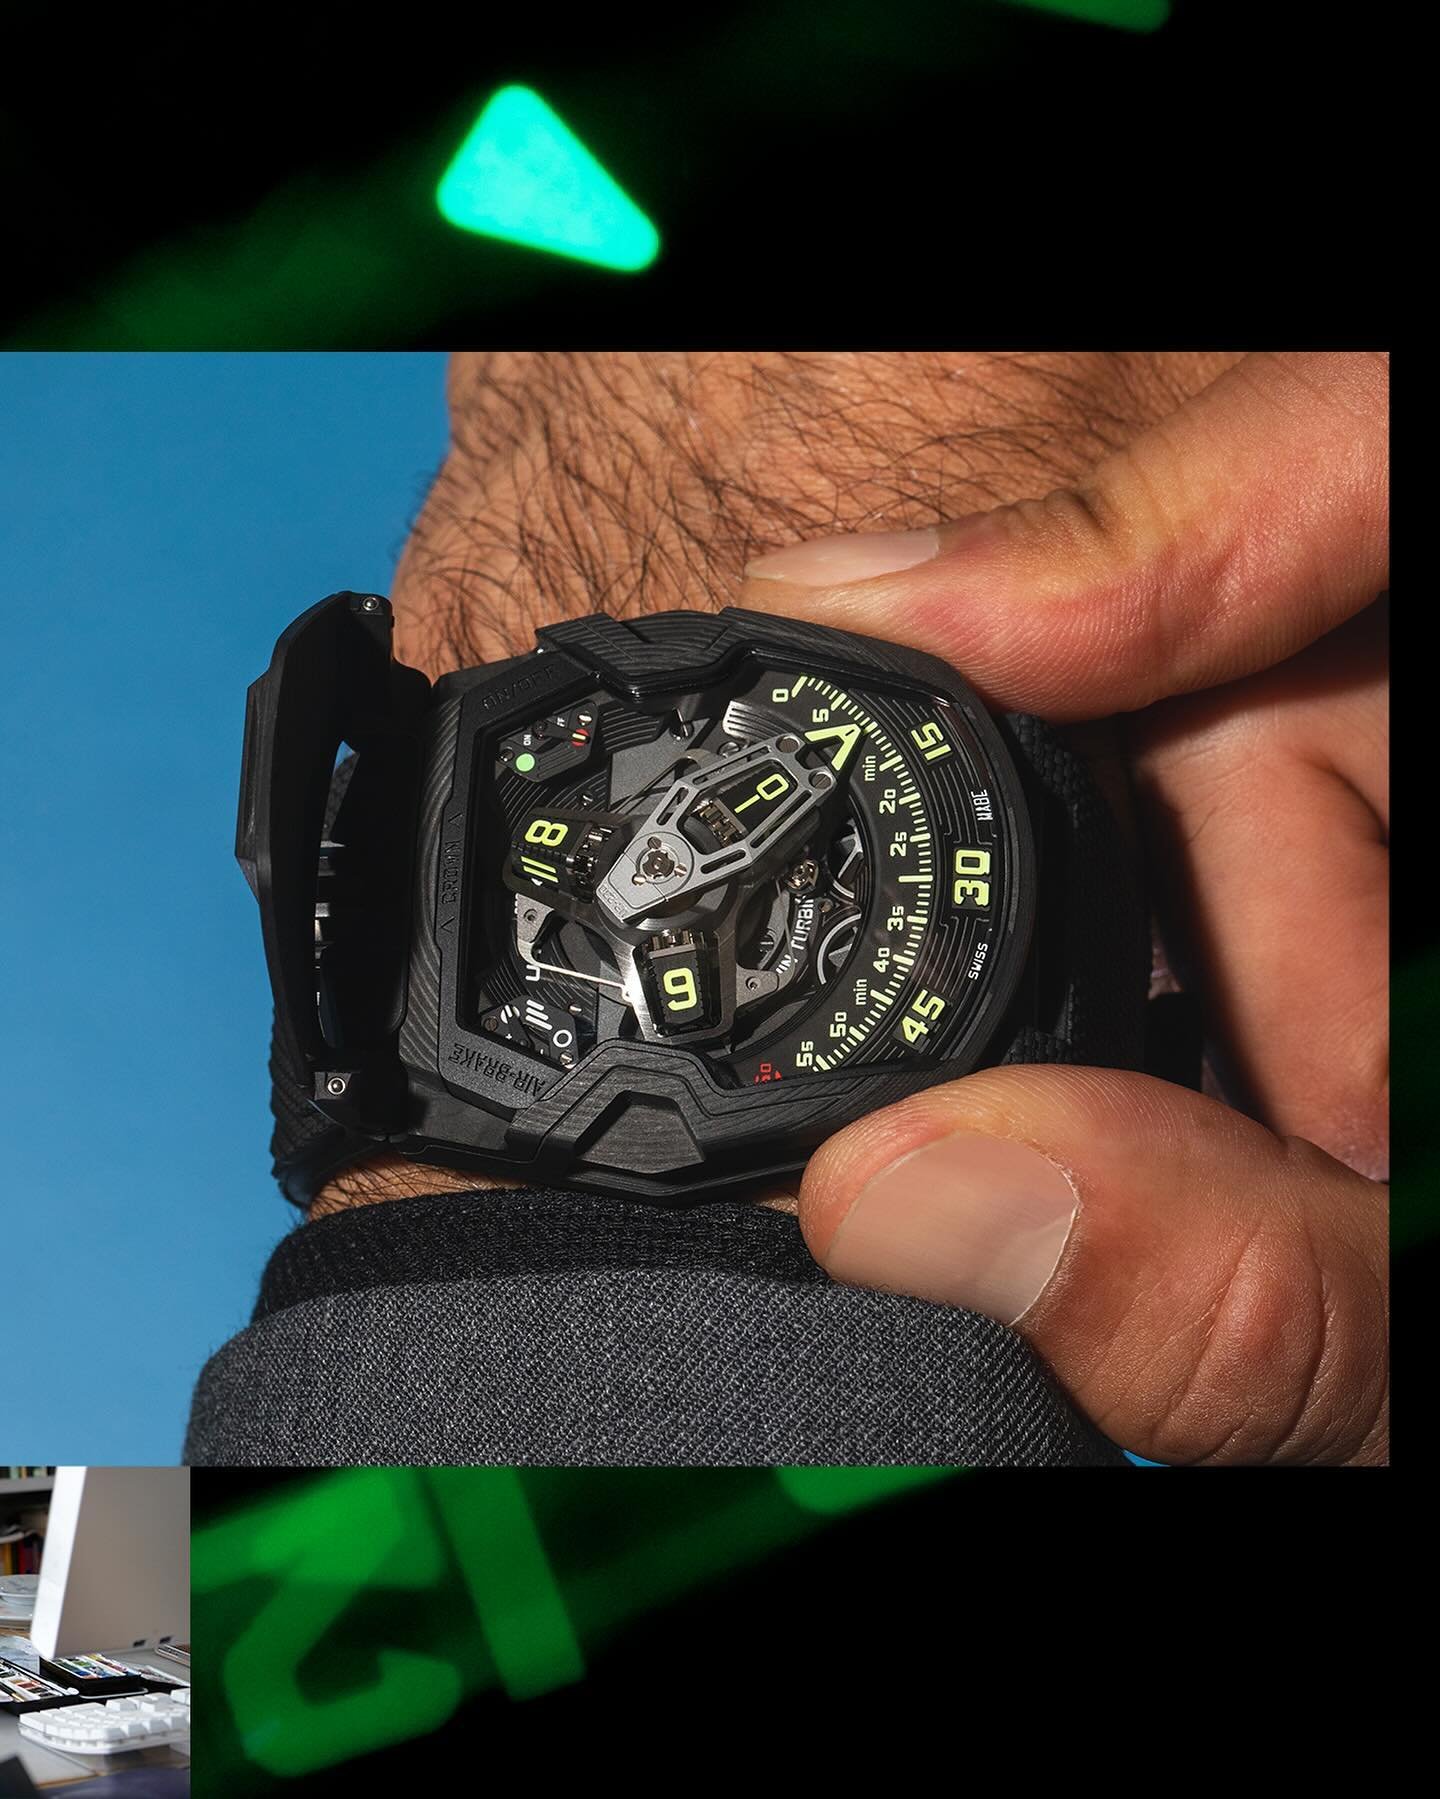 The UR-230 &ldquo;EAGLE&rdquo; has landed in 2023. The @urwerkgeneve UR-200 family is taking off to new heights. URWERK has developed a world-first set of shock absorbers designed to protect the new UR-7.30 calibre via turbines. Two symmetrical indic